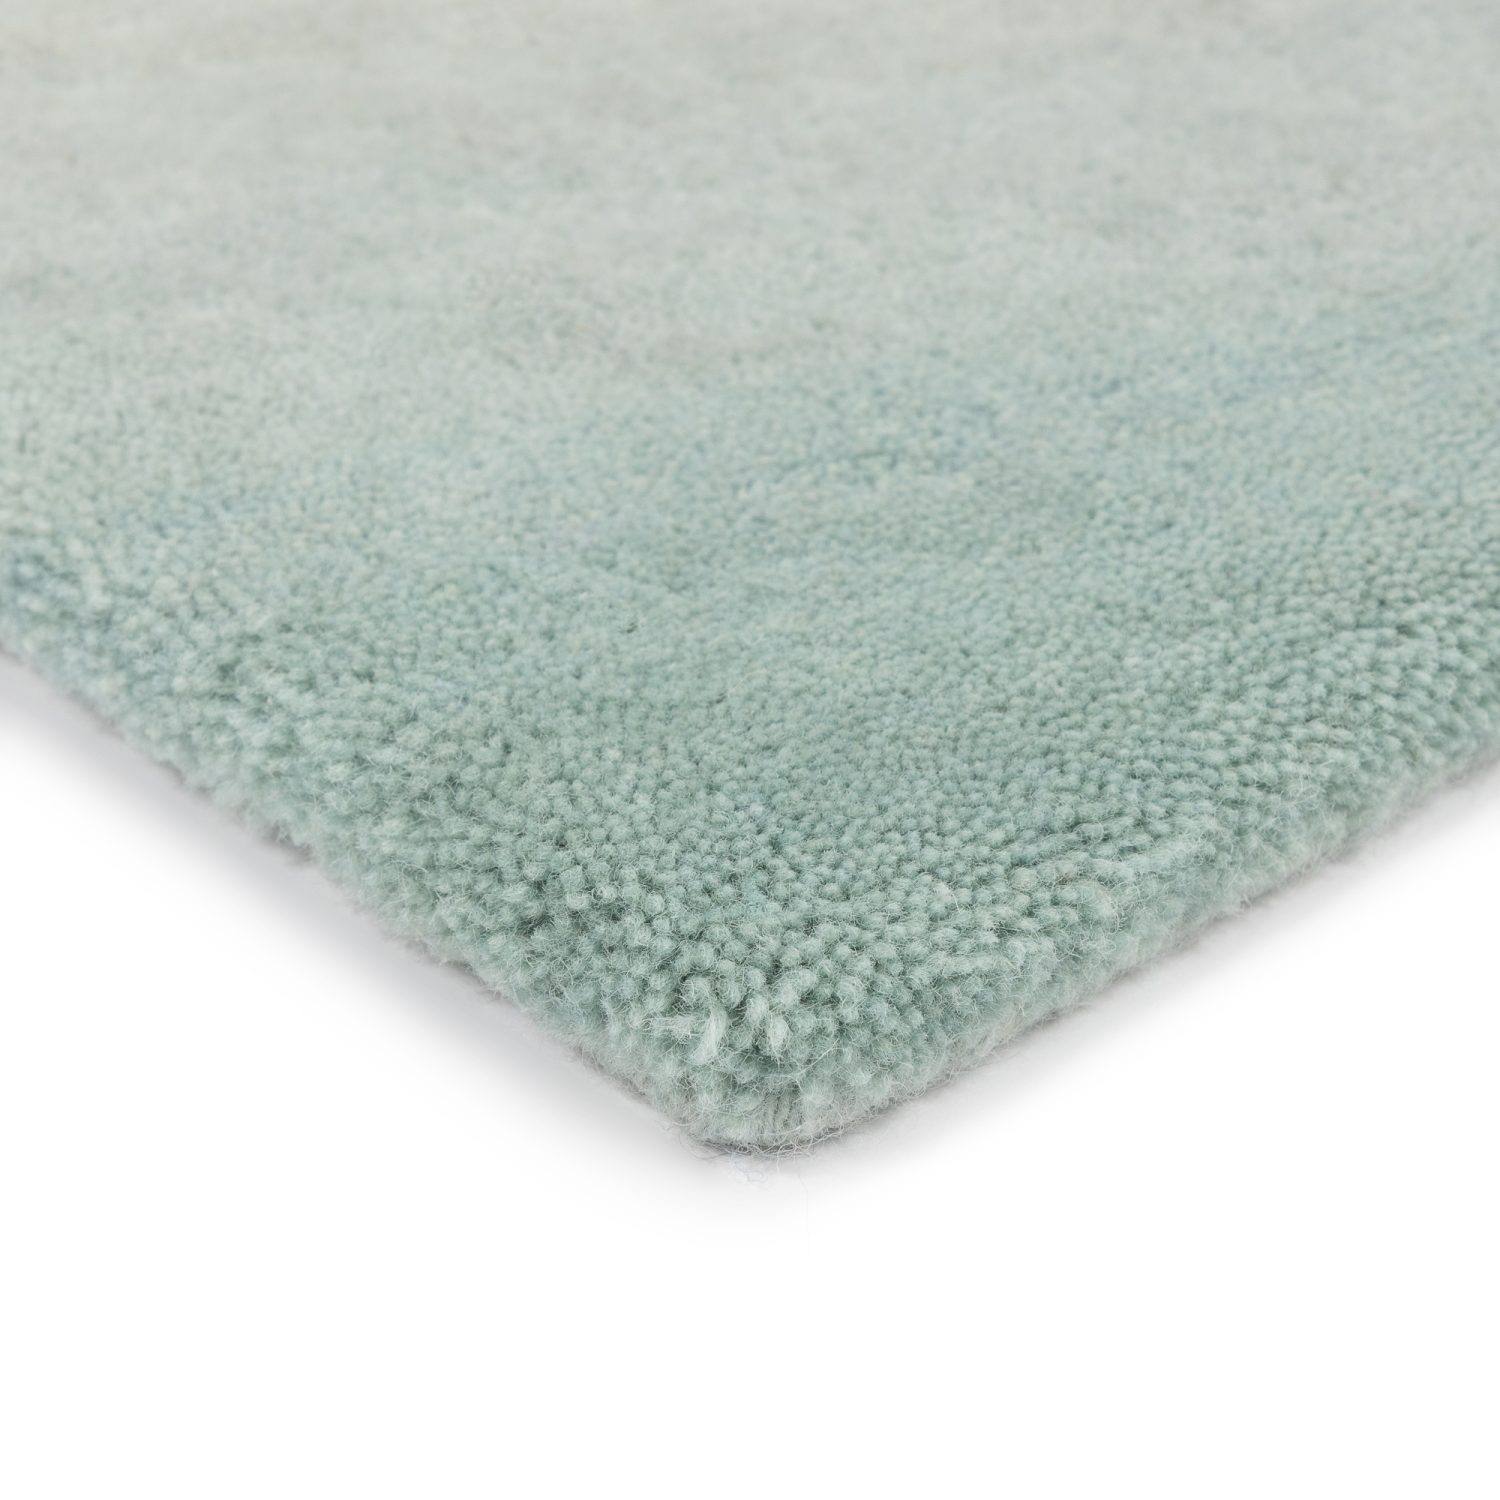 Create a sense of ambience with the Diffuse rug